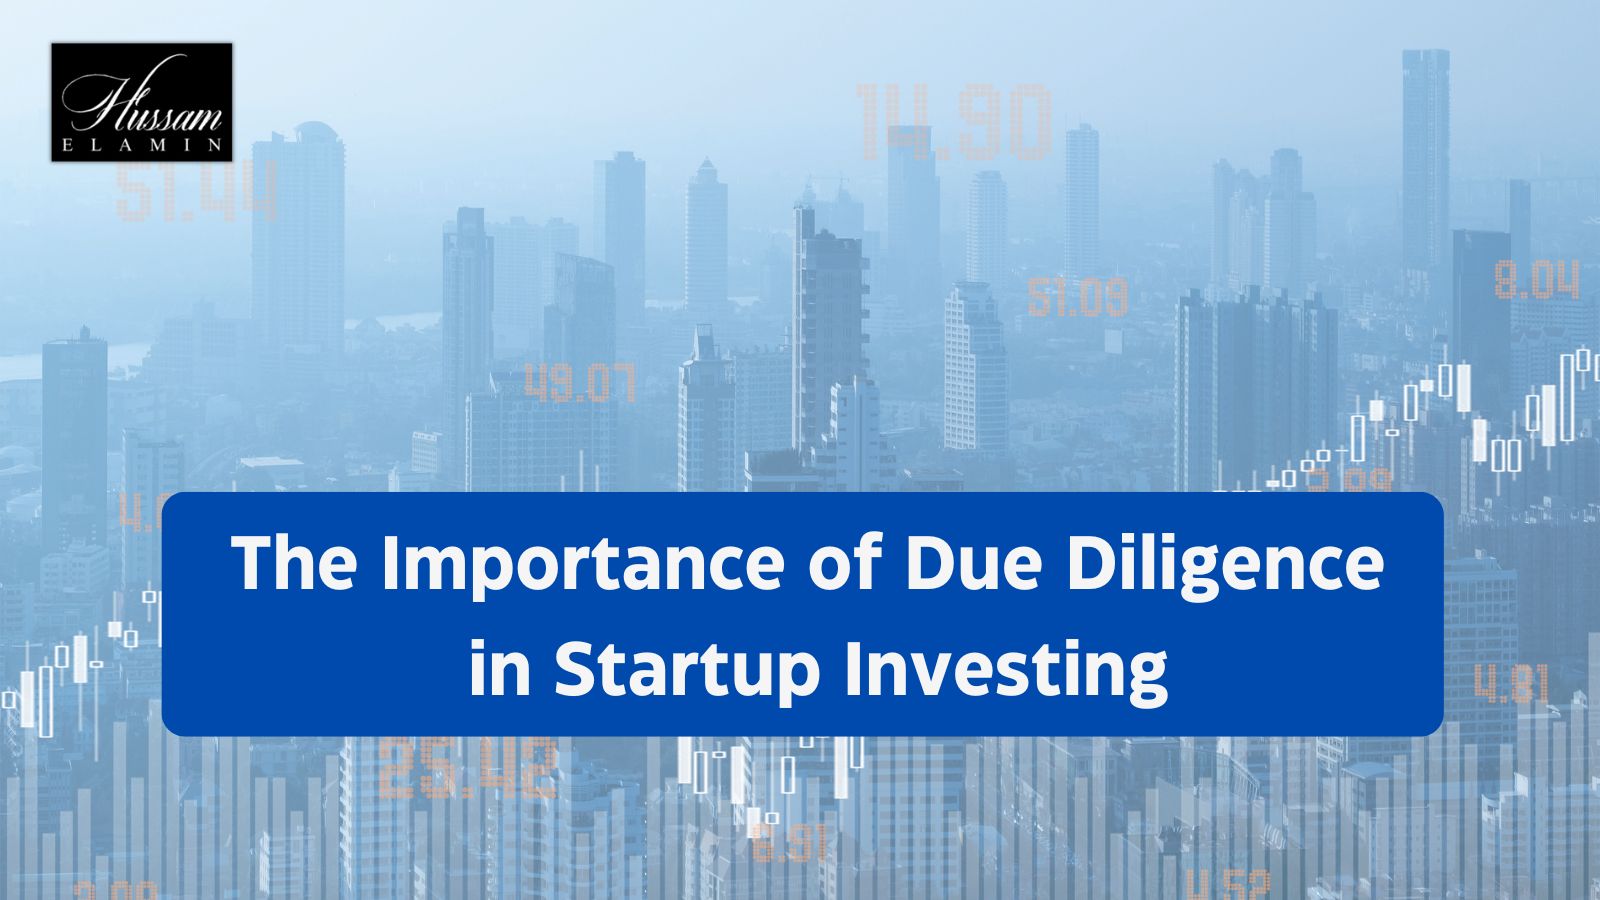 The Importance of Due Diligence in Startup Investing